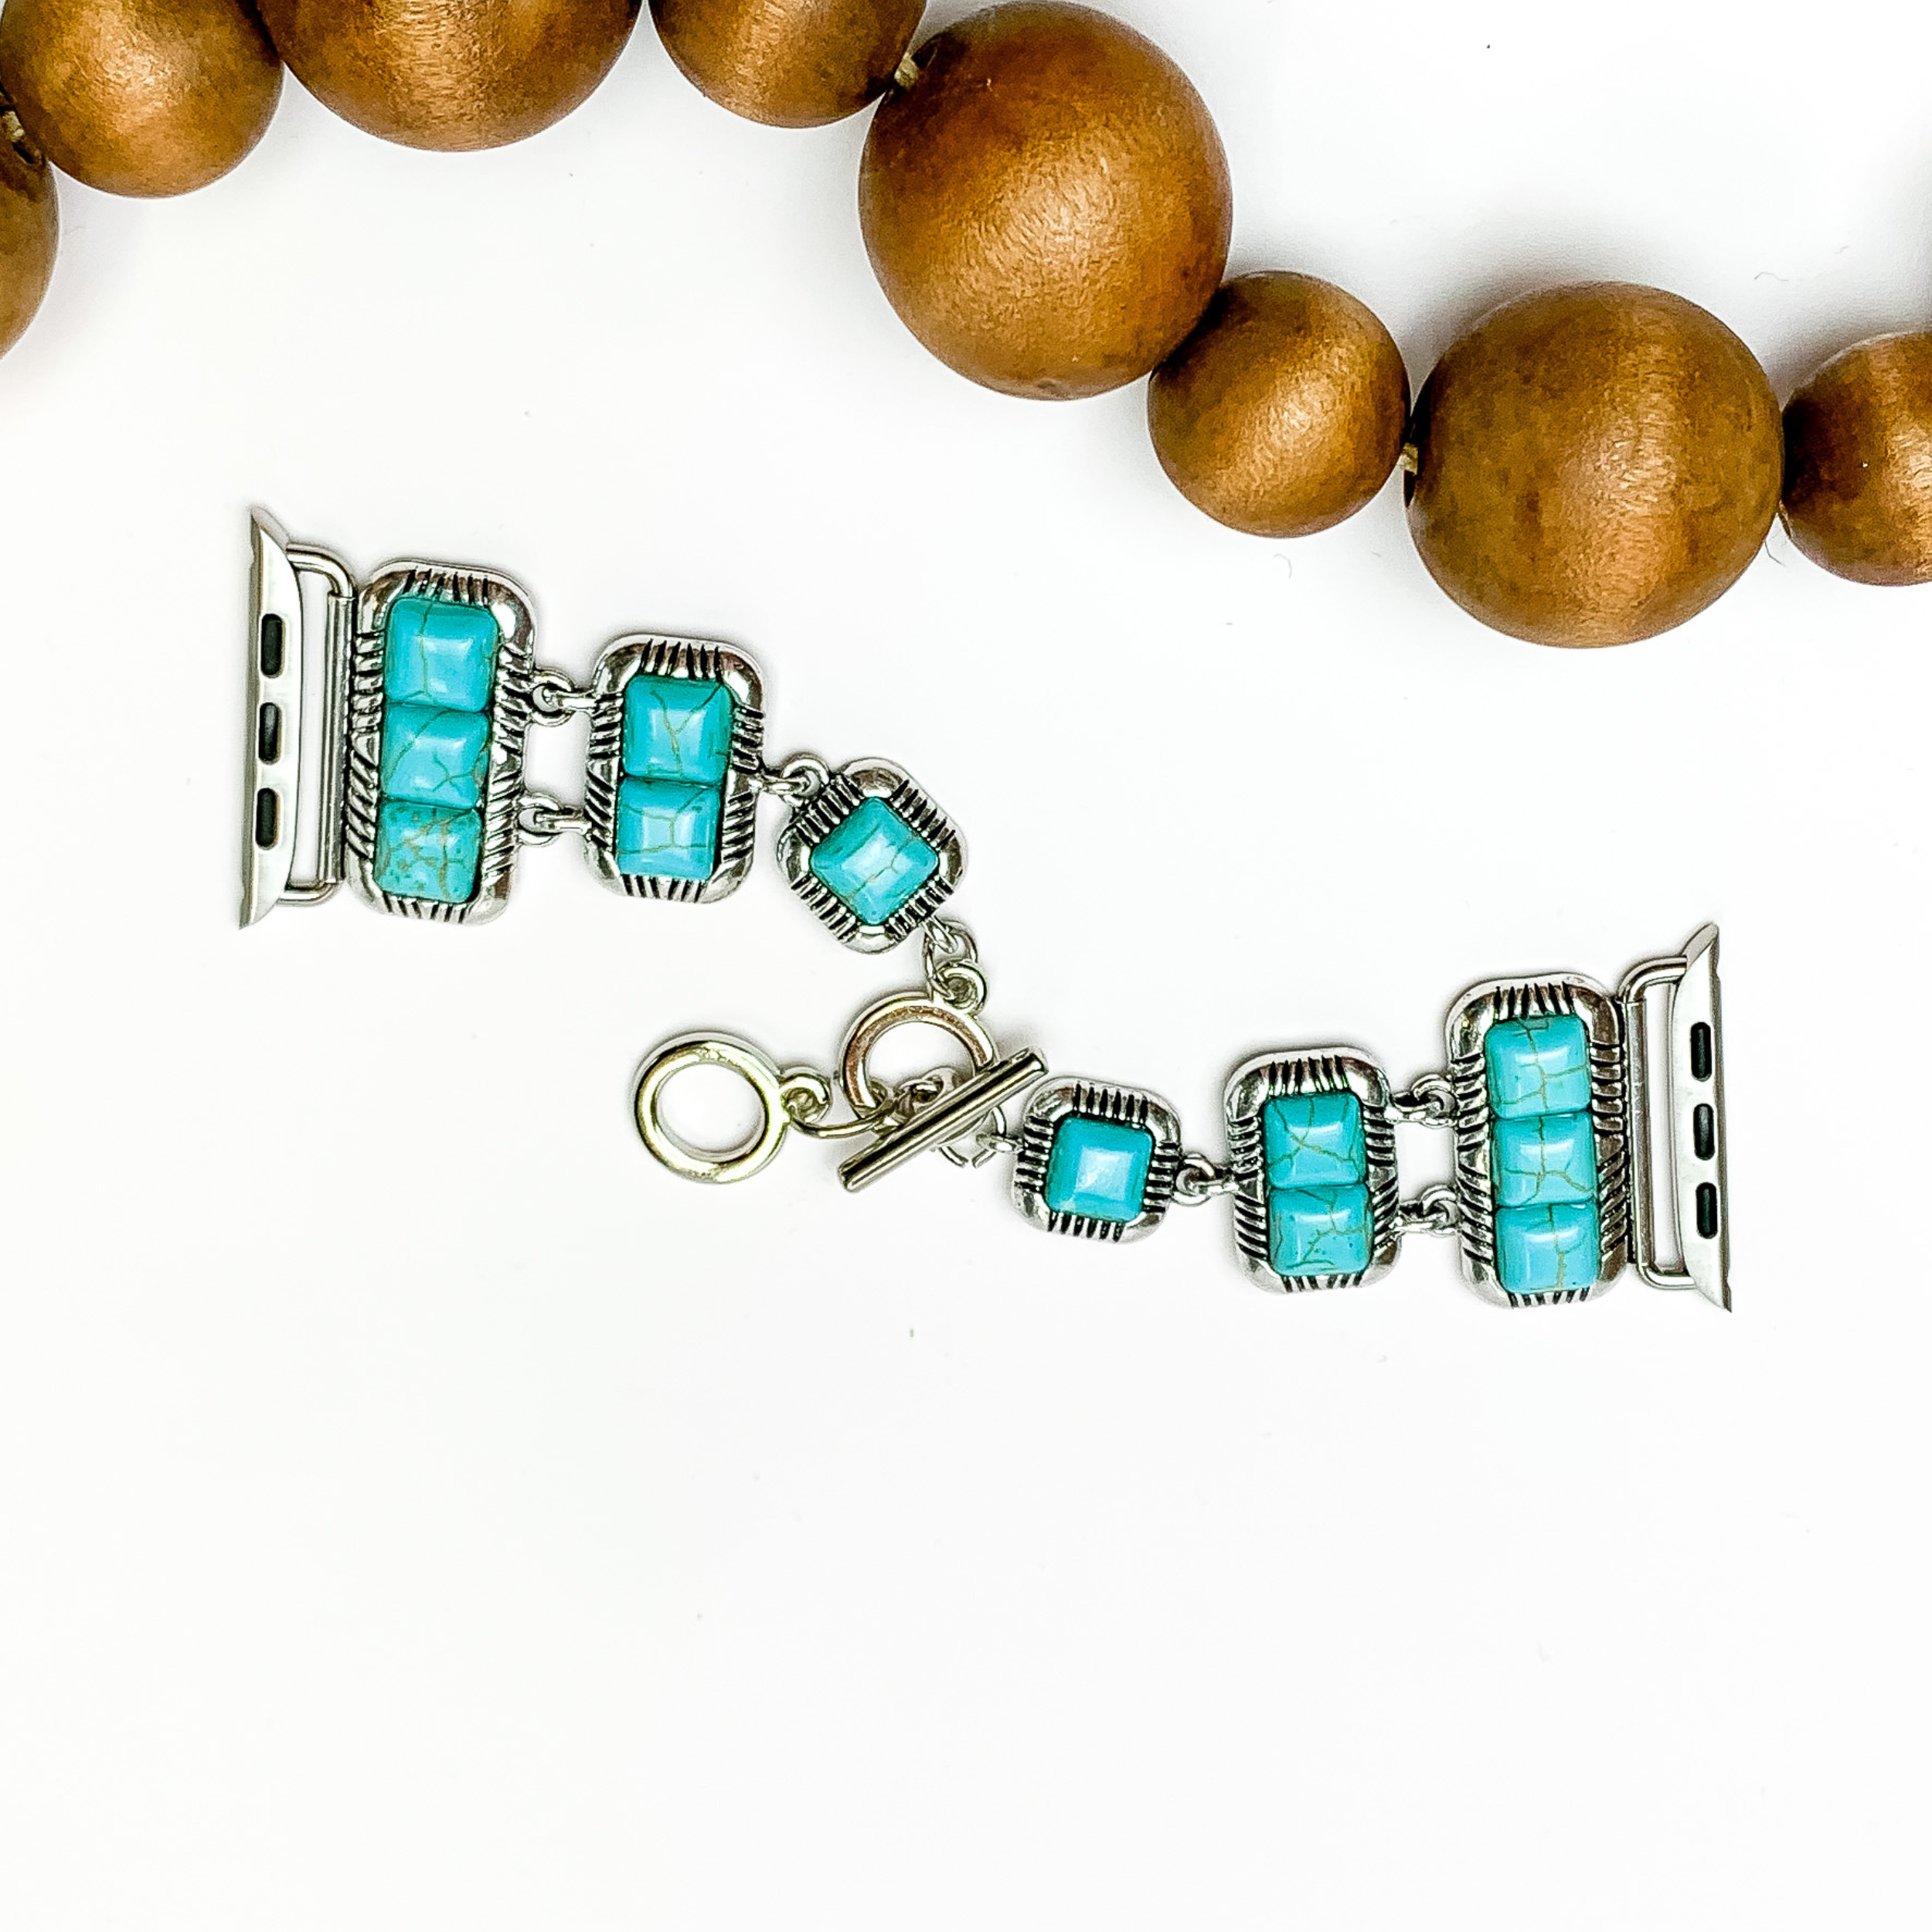 Silver smart watch band with five turquoise stones in each side with a toggle clasp. Turquoise stones are in square shape going from three stones to two stones and then one stone right before the toggle clasp. the watch is pictured on a white background with wooden beads above the watch.